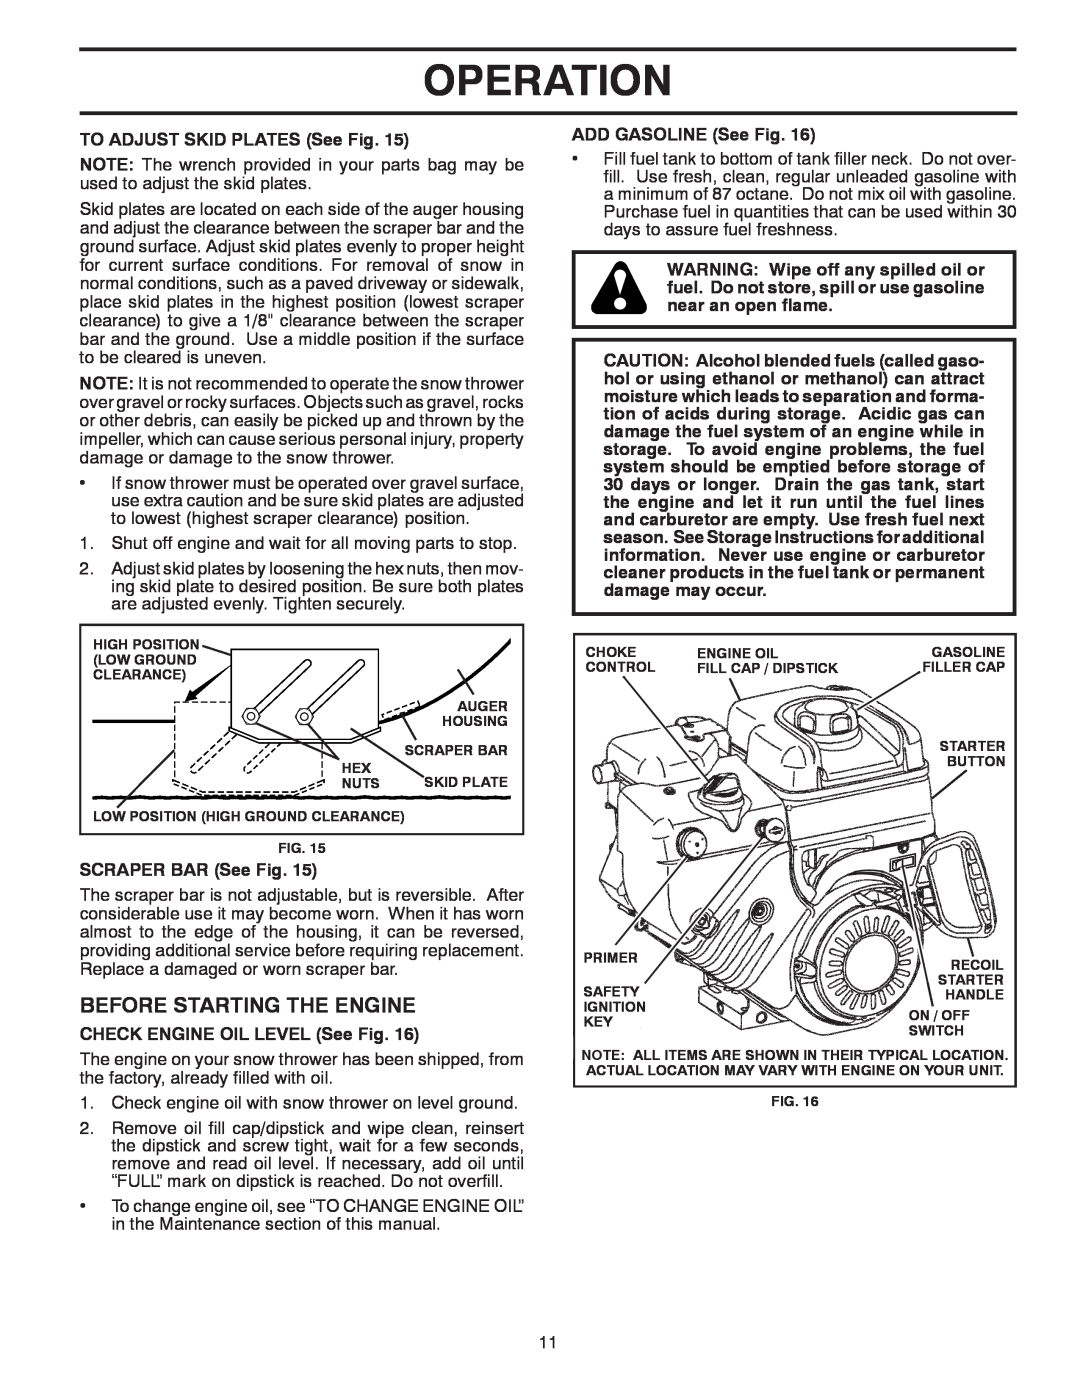 Poulan 96194000504 owner manual Before Starting The Engine, Operation, TO ADJUST SKID PLATES See Fig, SCRAPER BAR See Fig 